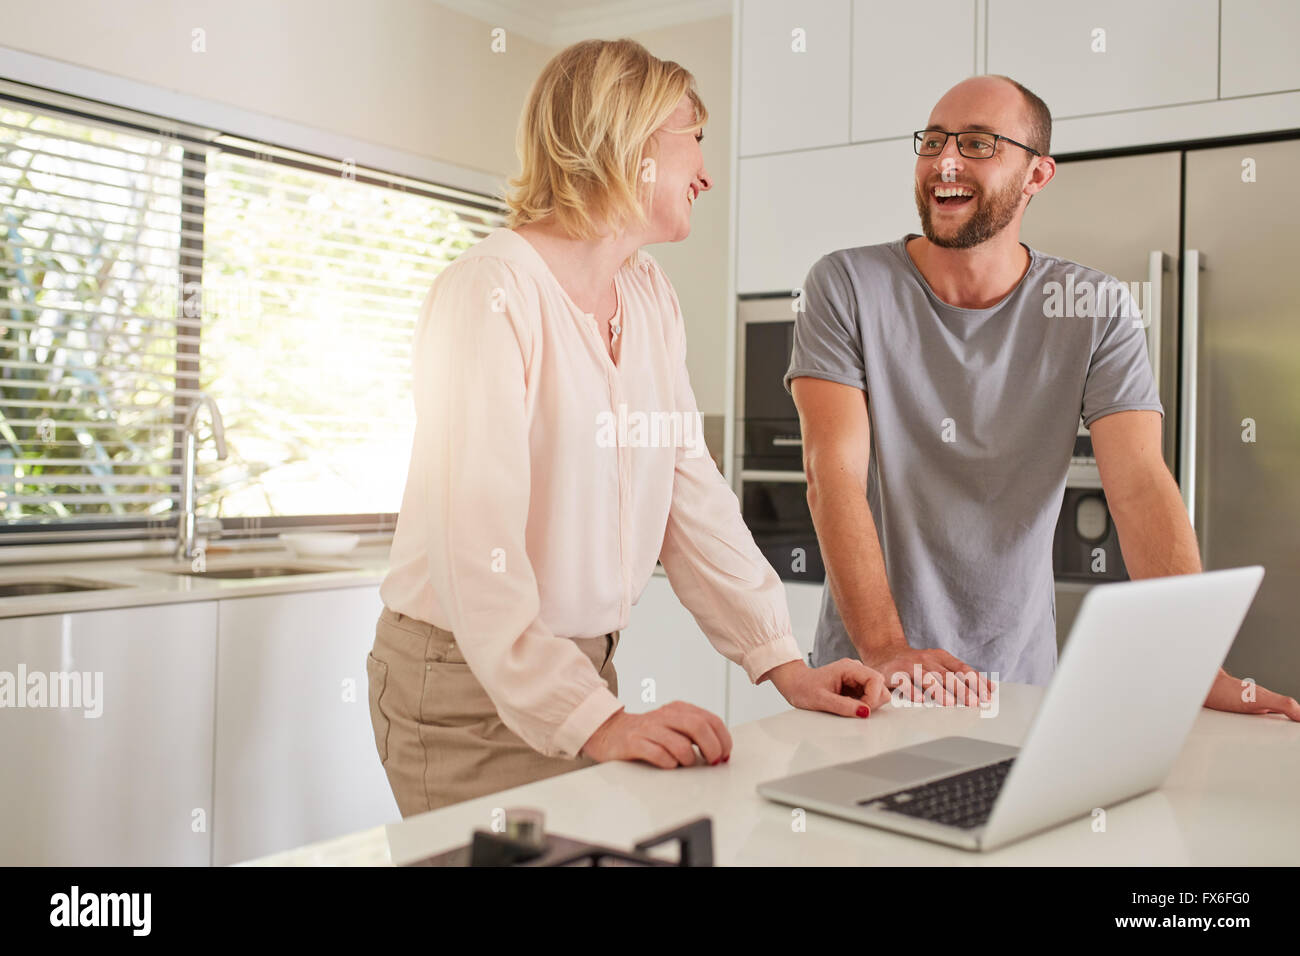 Indoor shot of a happy couple standing at kitchen counter with laptop computer. Man and woman looking at each other and smiling. Stock Photo